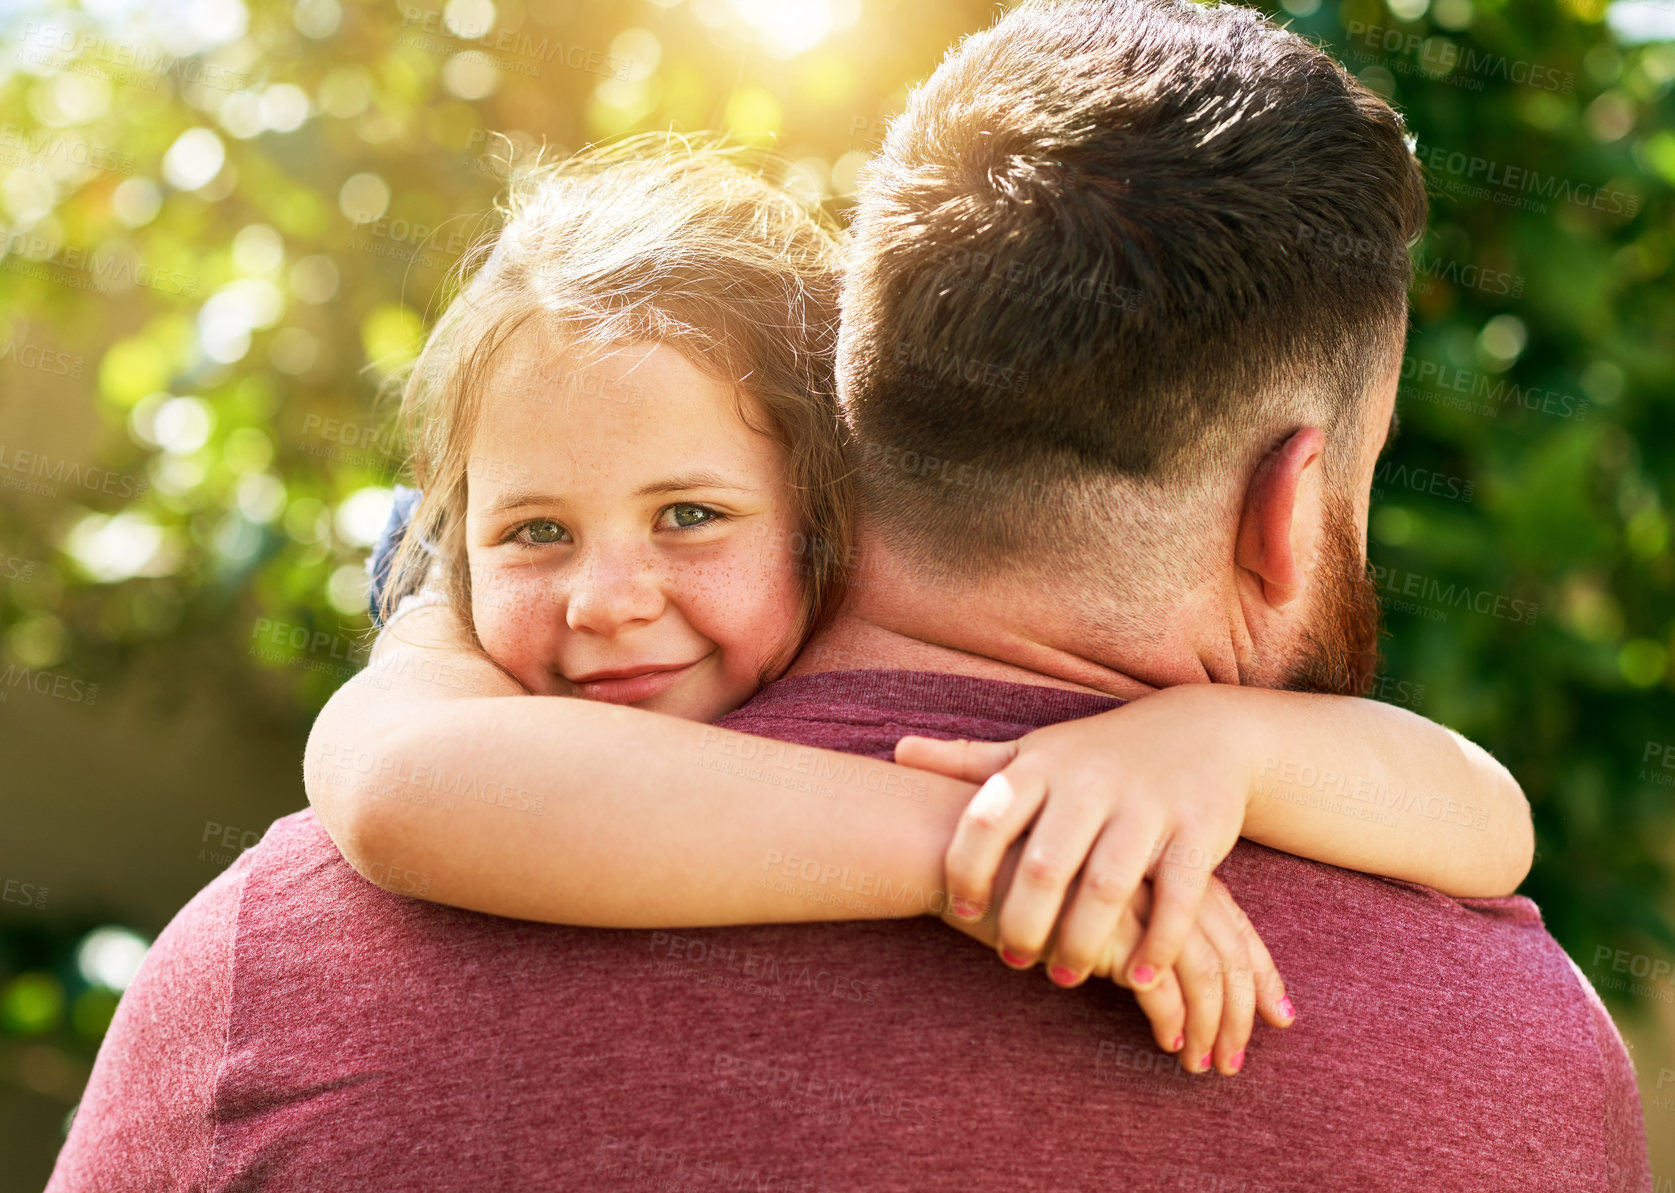 Buy stock photo Shot of an adorable little girl giving her father a hug outdoors